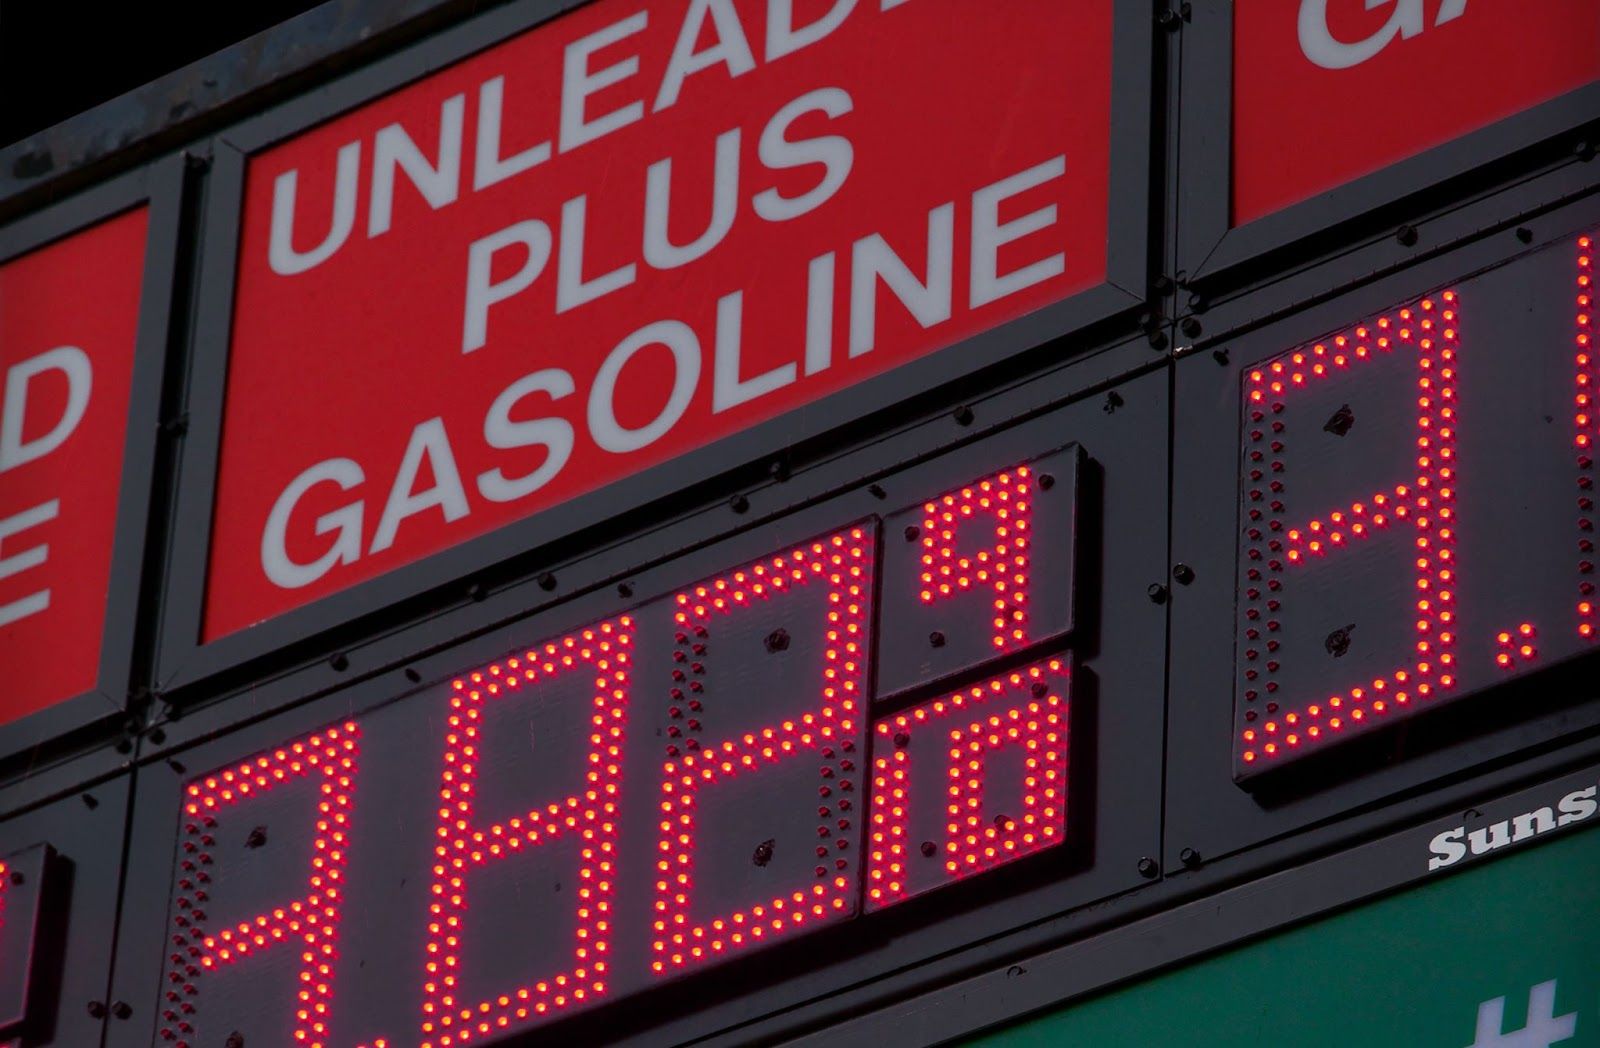 Gasoline prices are at their all-time high.